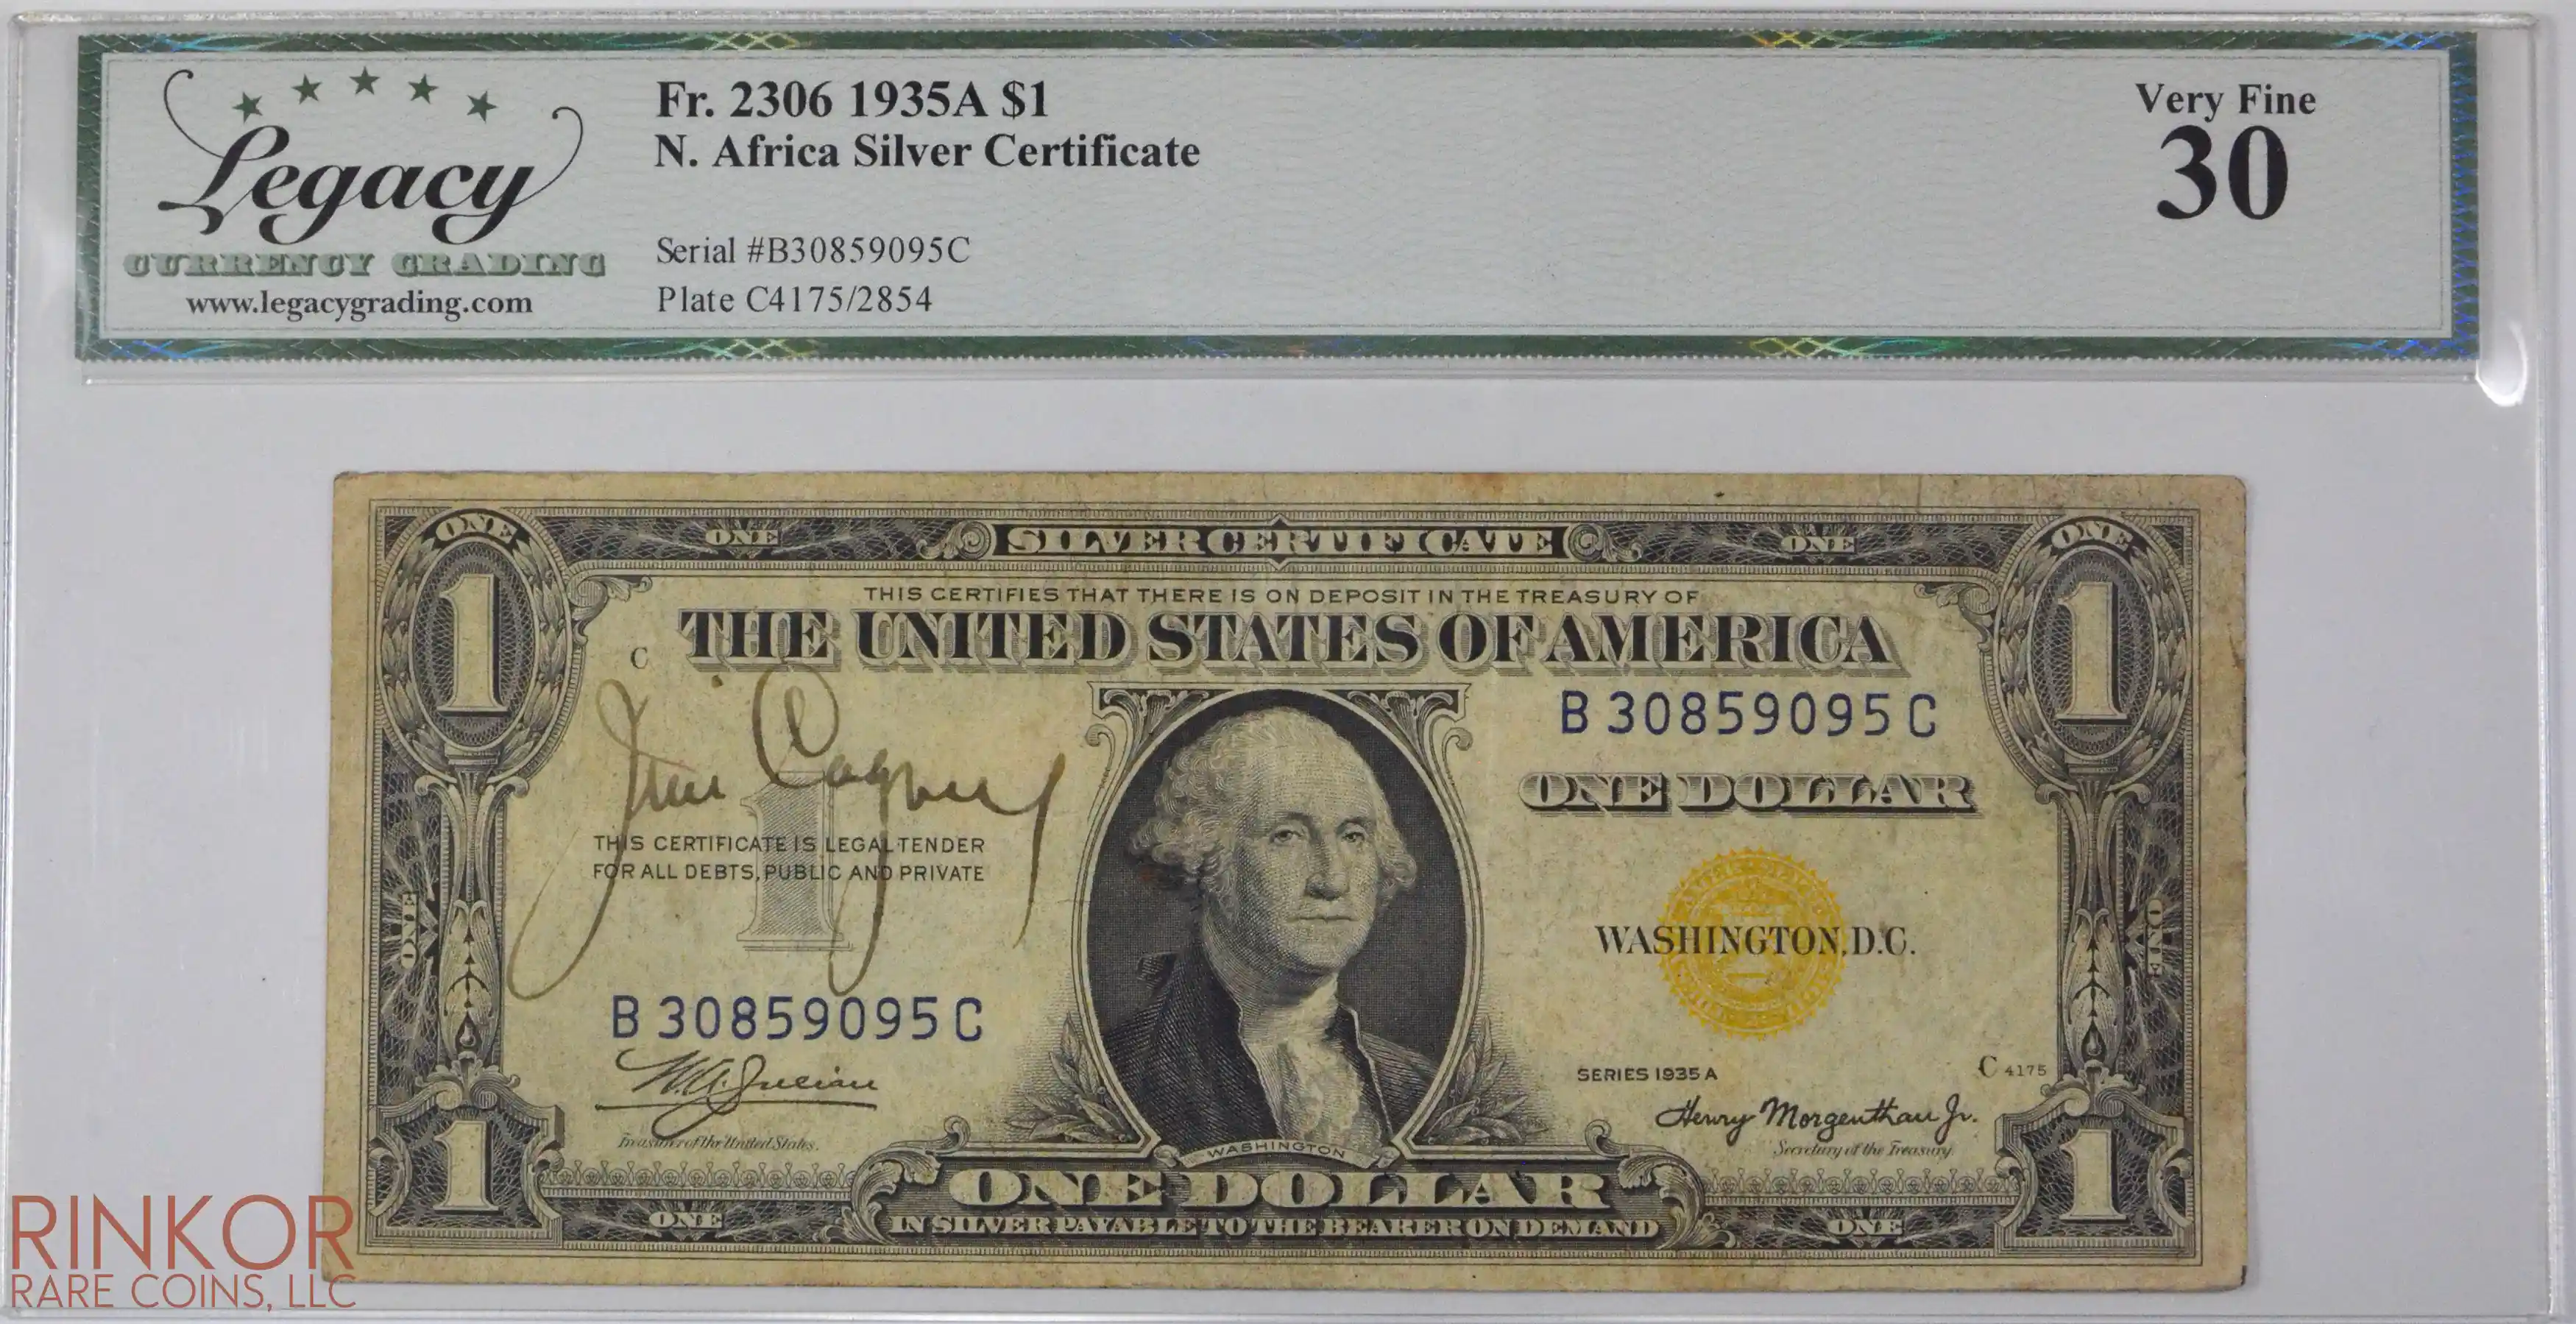 1935A $1 Fr. 2306 North Africa Silver Certificate James Cagney Auto LCG VF-30